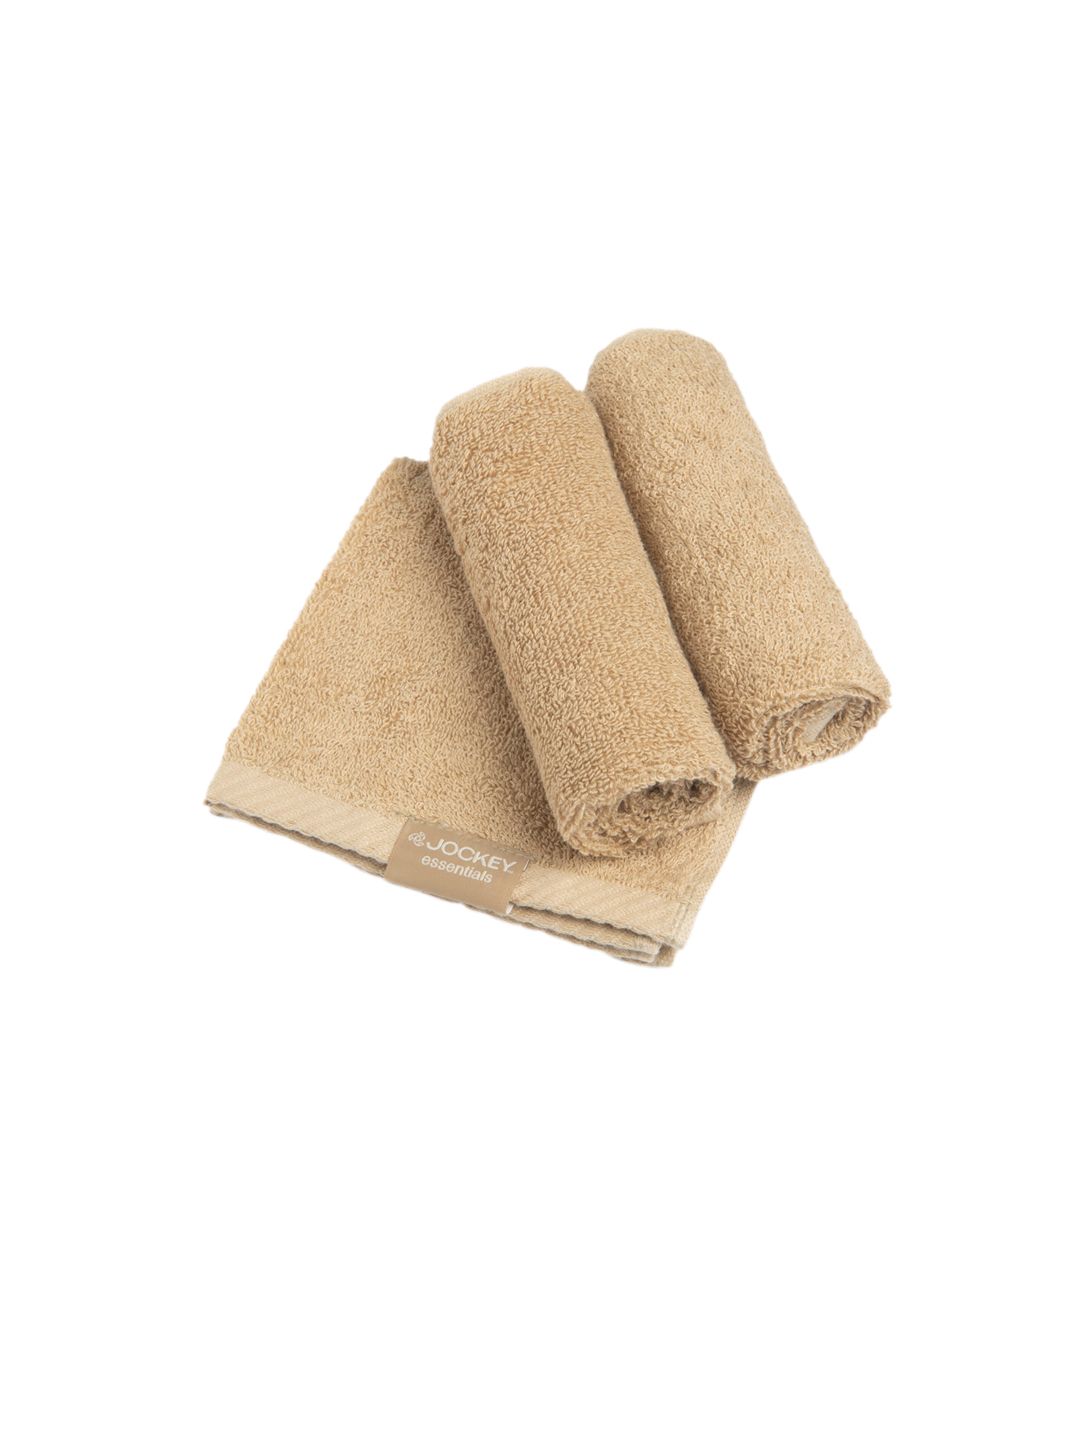 Jockey Set Of 3 Camel Brown Solid 450 GSM Pure Cotton Face Towels Price in India